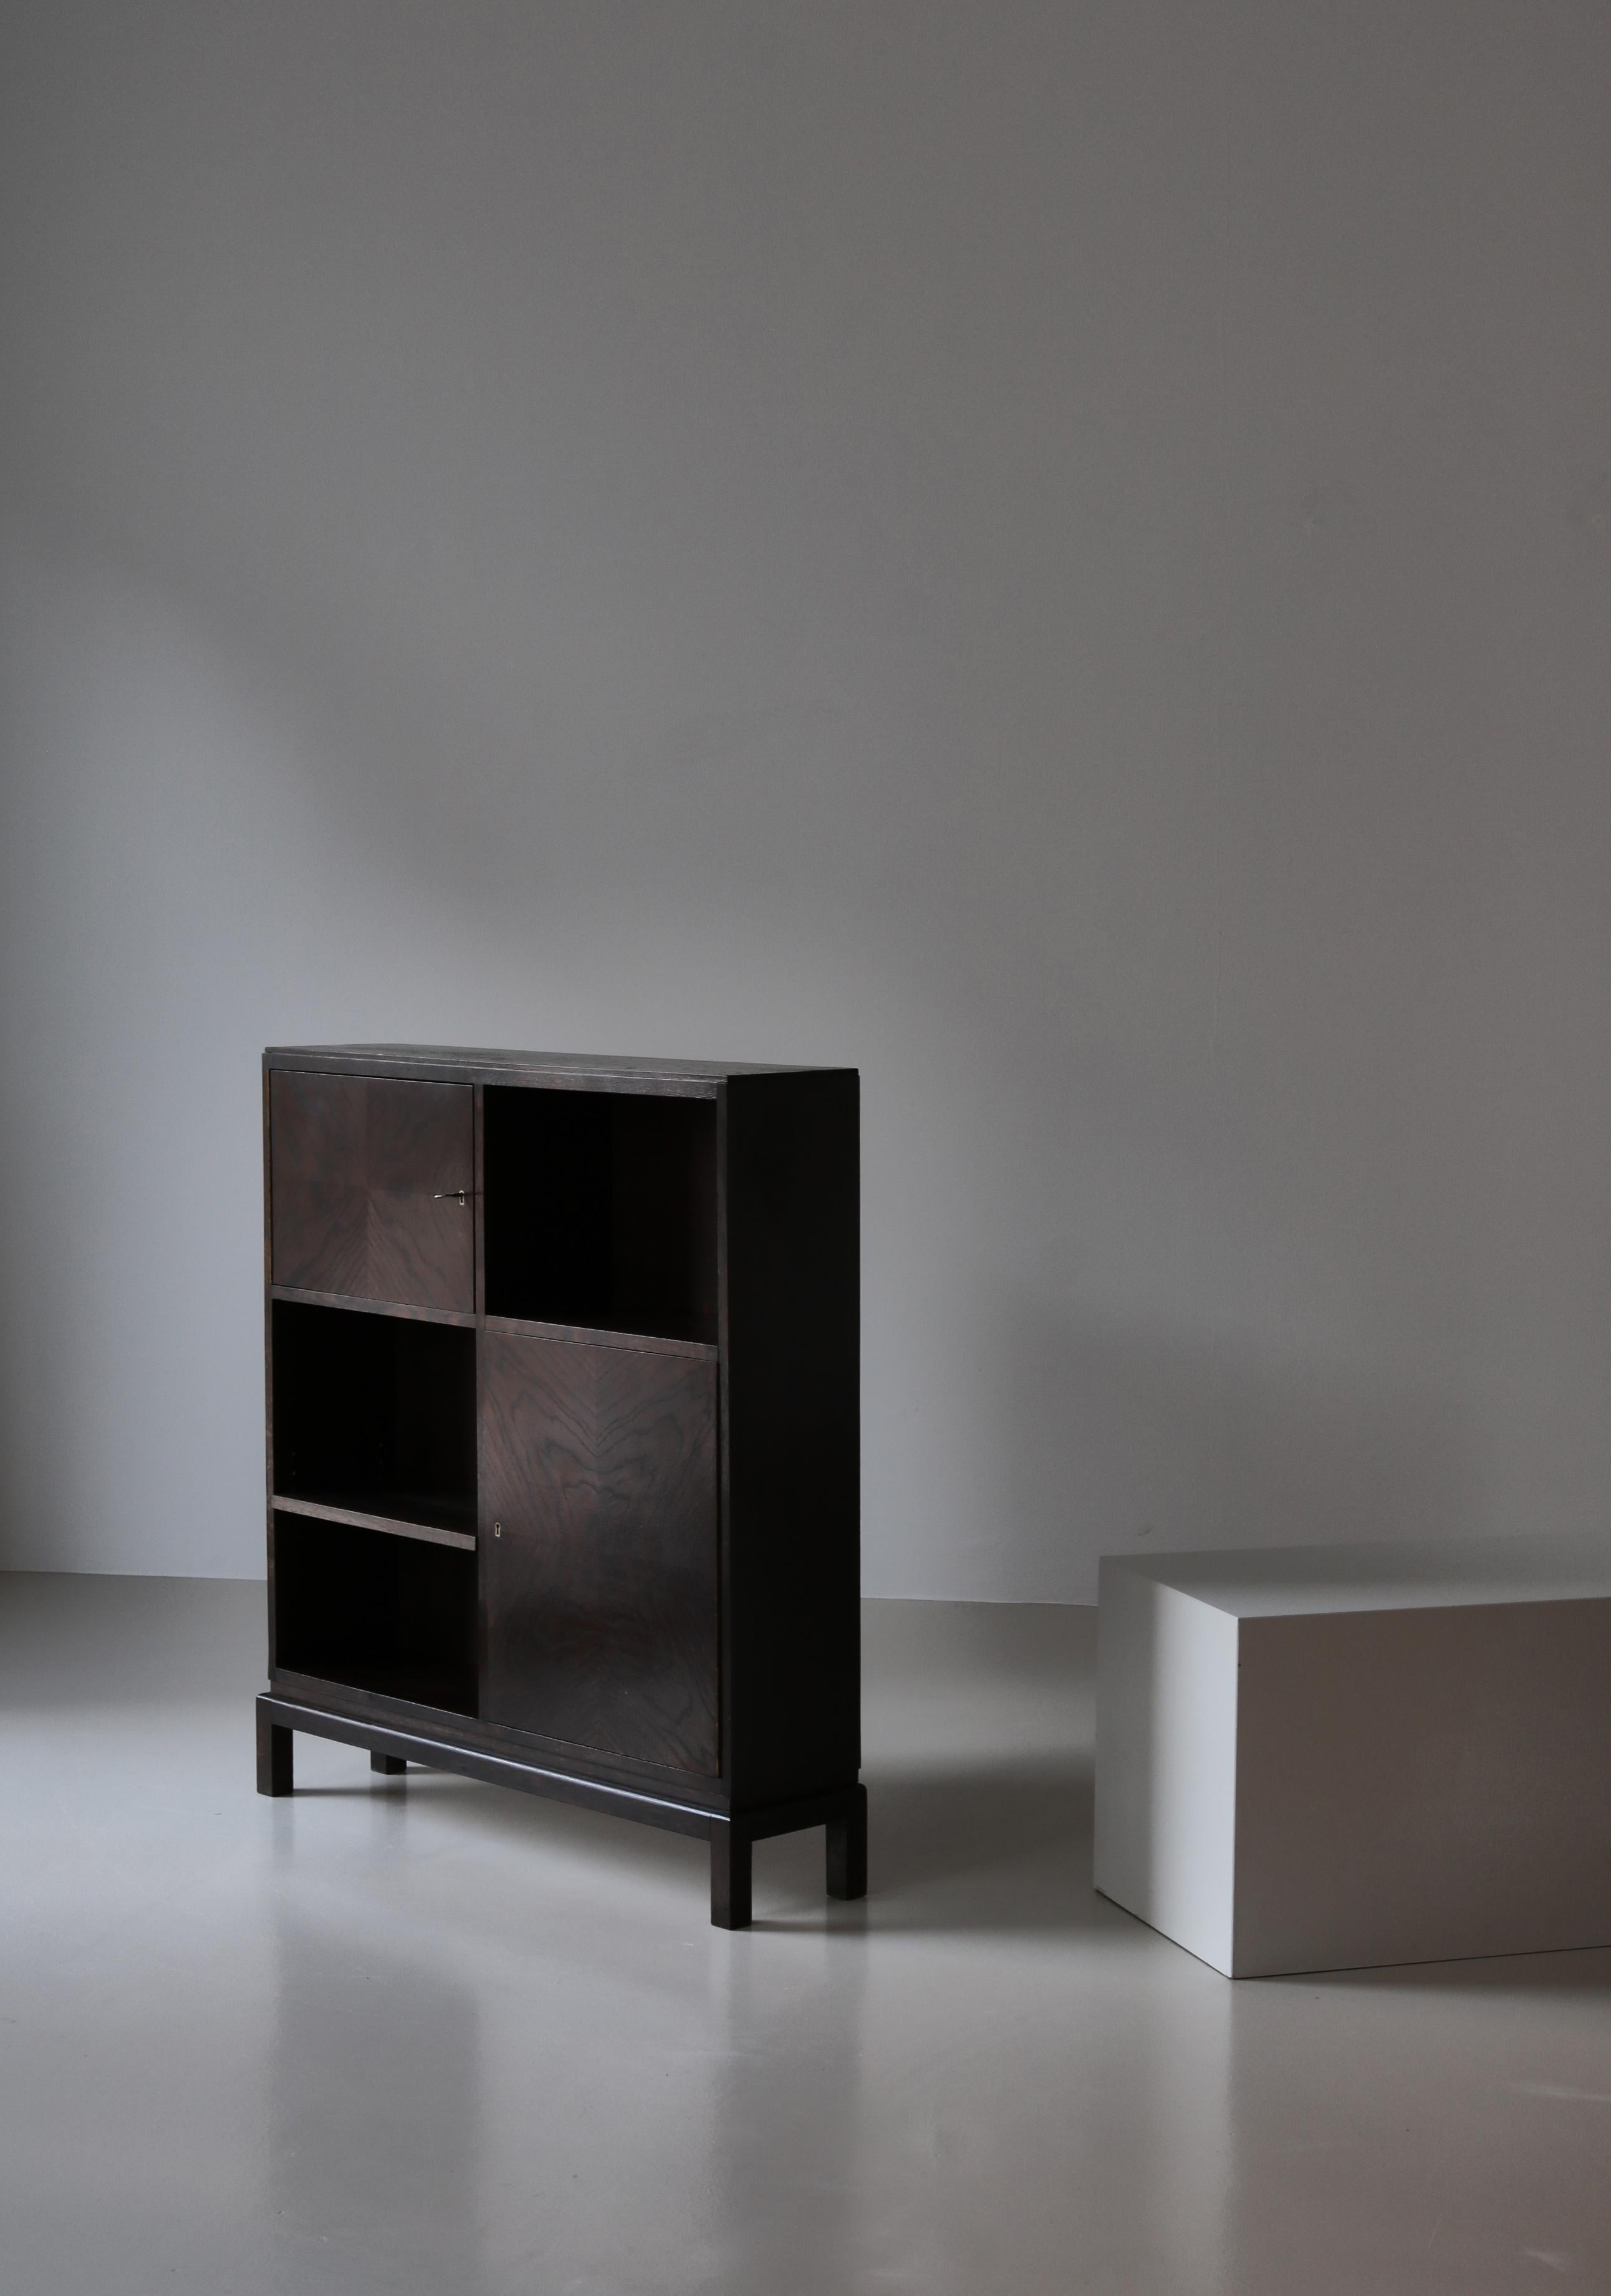 Charming cabinet made in Denmark in 1930 by an unknown cabinetmaker. The cabinets exterior is made of dark patinated oak and the interior in warm pinewood. The style is typical for the Danish adaptation of the functionalist Bauhaus-style, that was